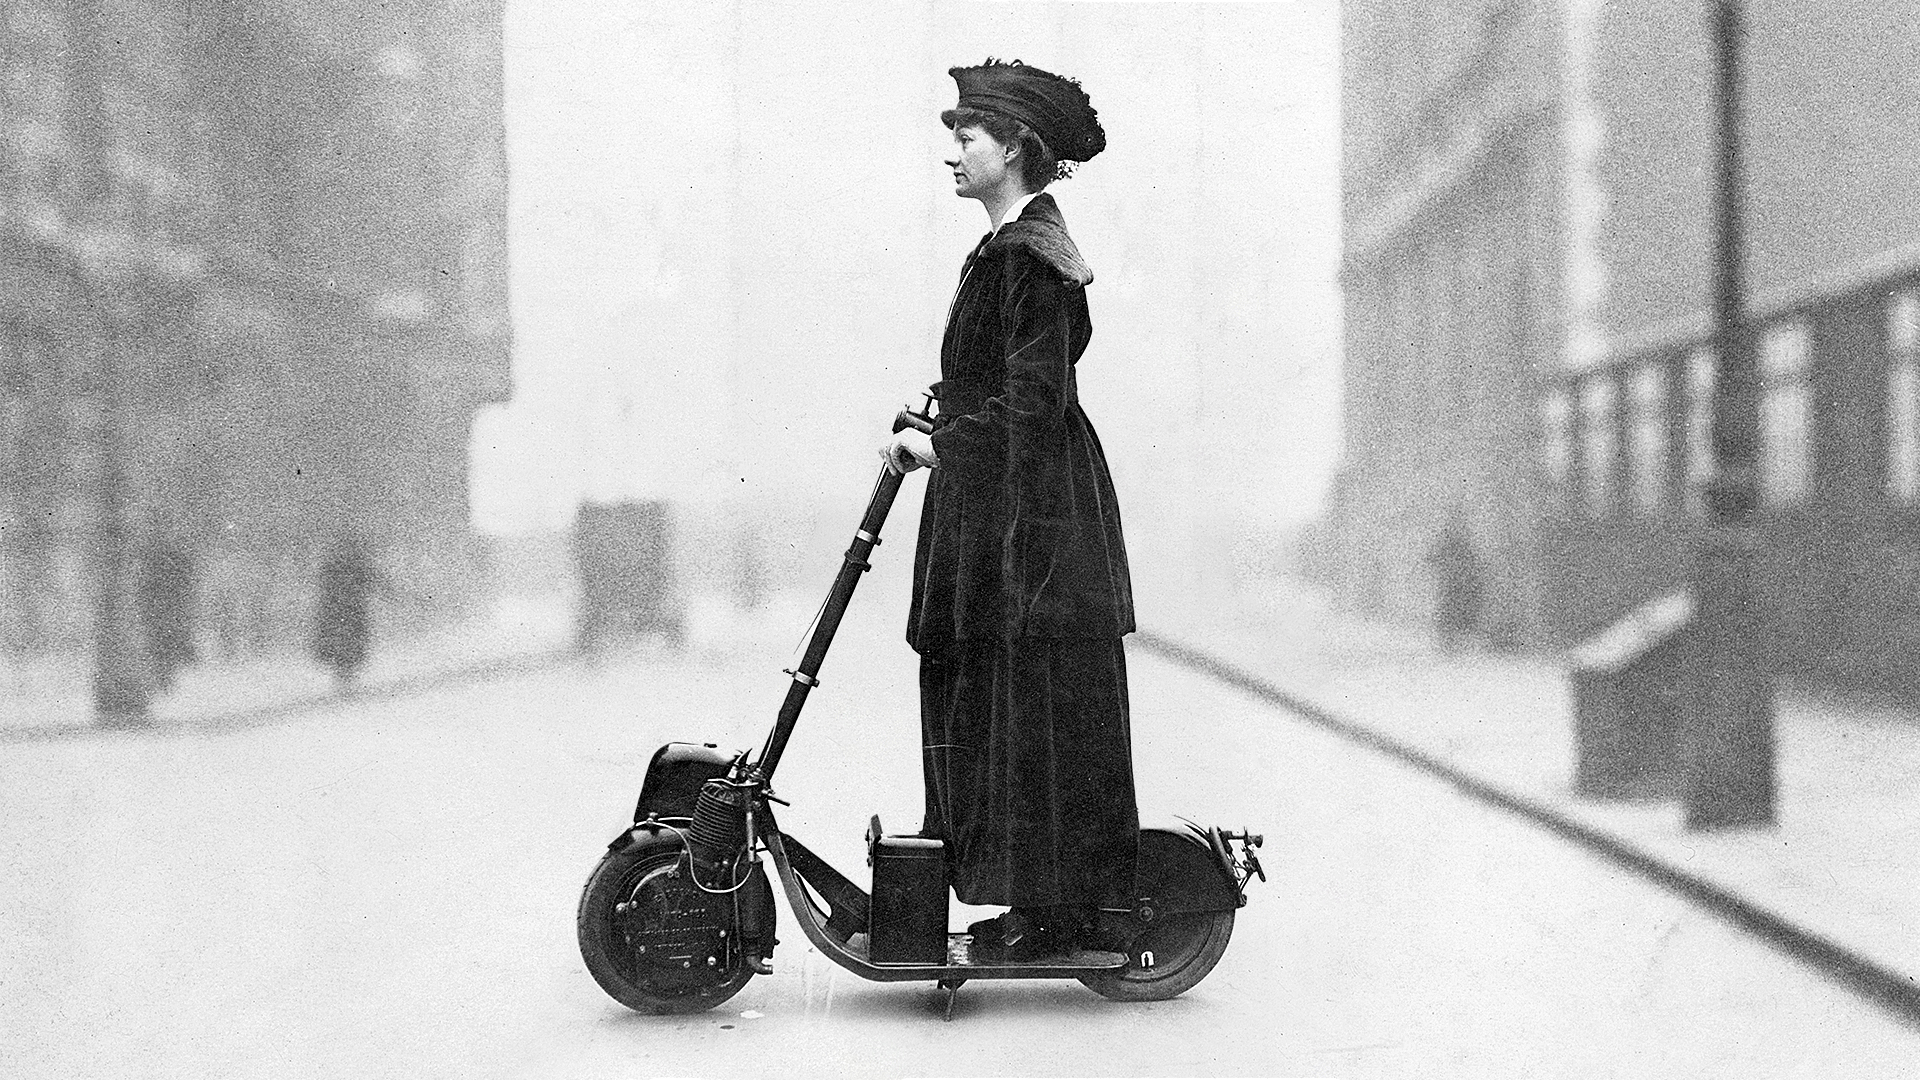 From the invention of the usages modern scooter to